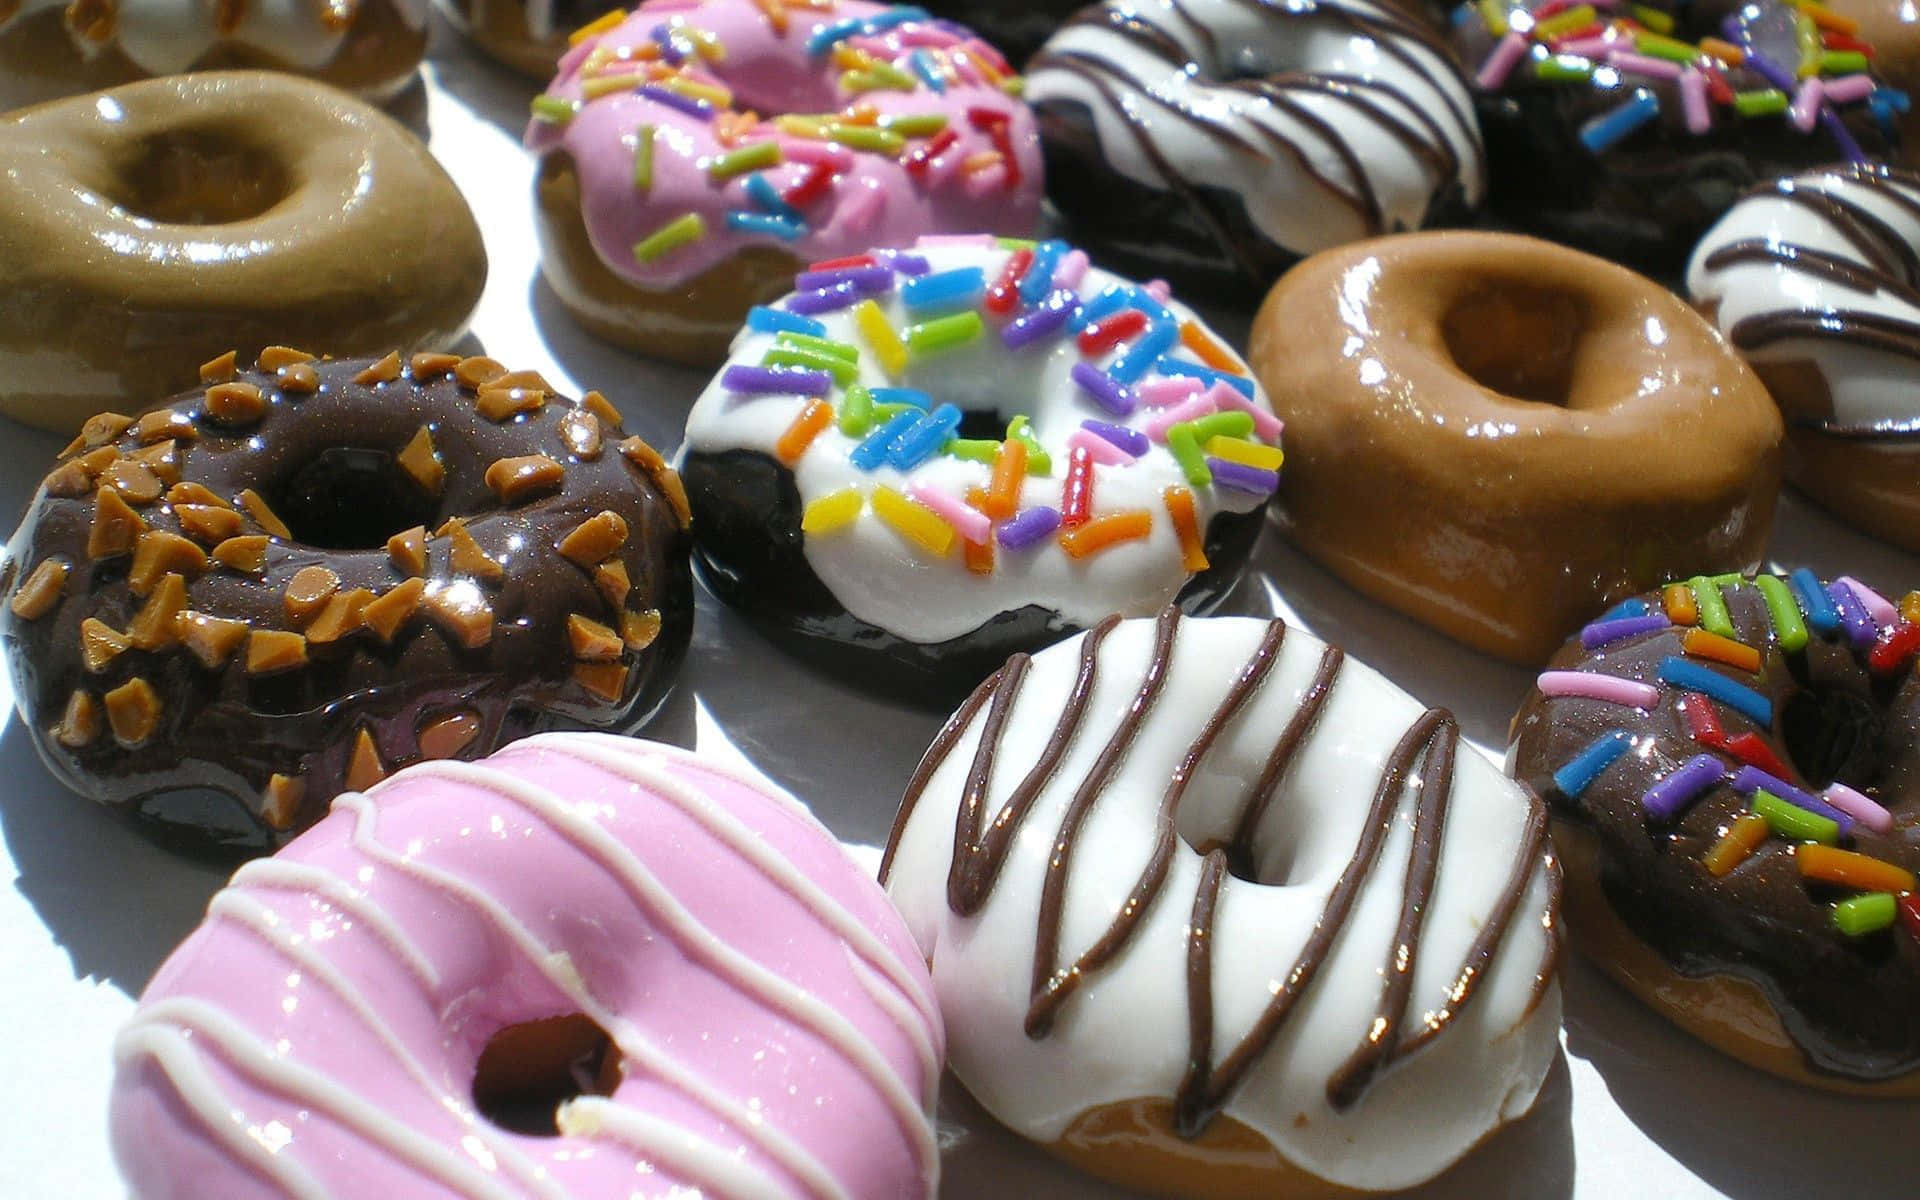 Delicious Glazed Donuts dripping with frosting